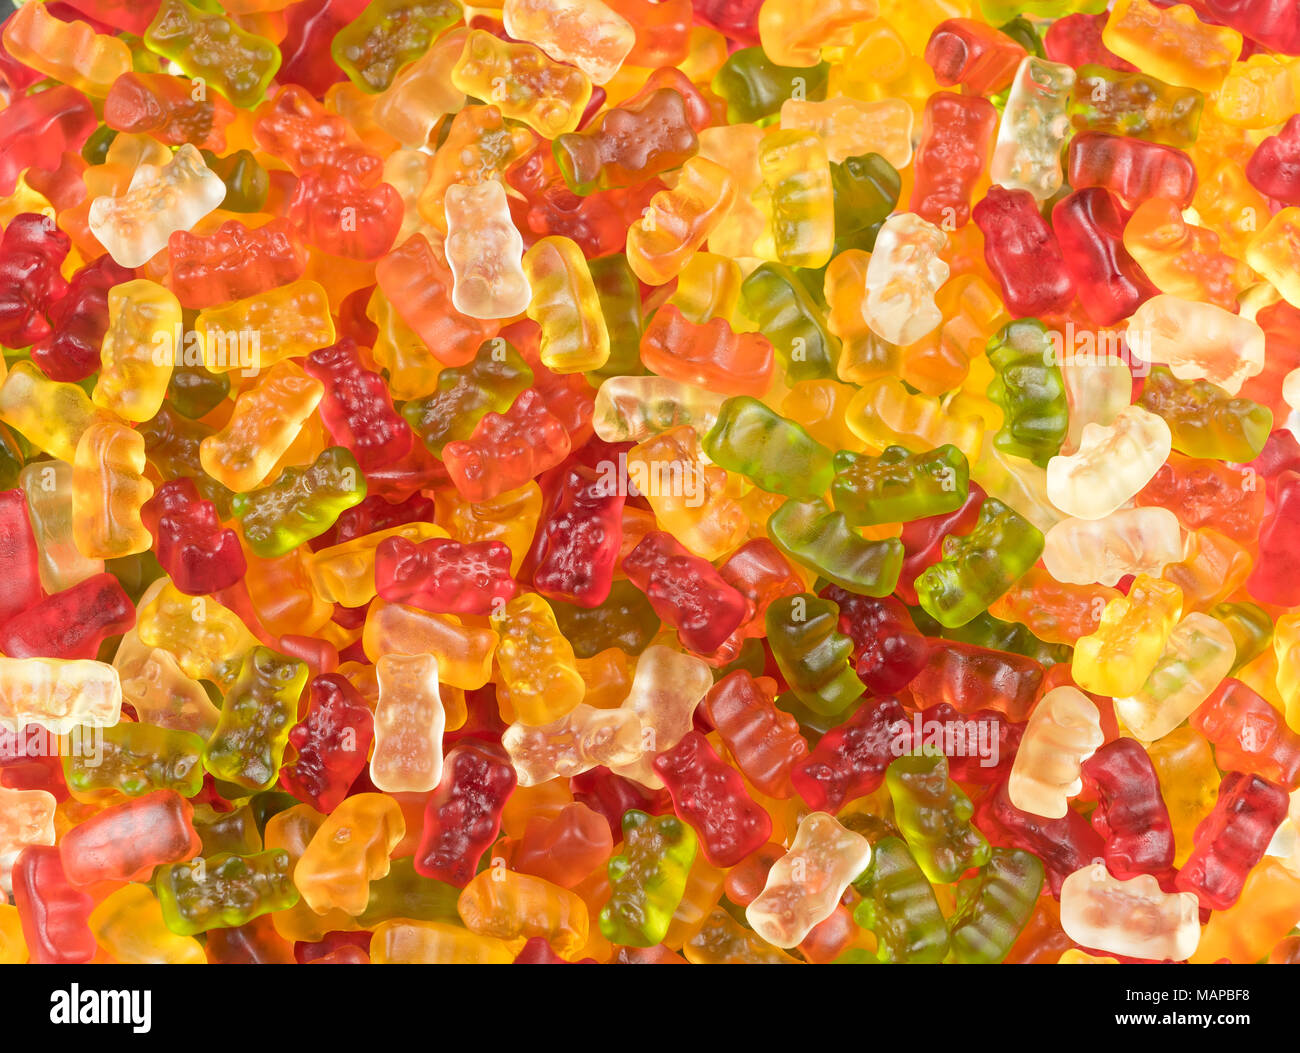 Brightly coloured gummy bear sweets / jelly babies in a candy sweet shop. Potential use as a background. Stock Photo